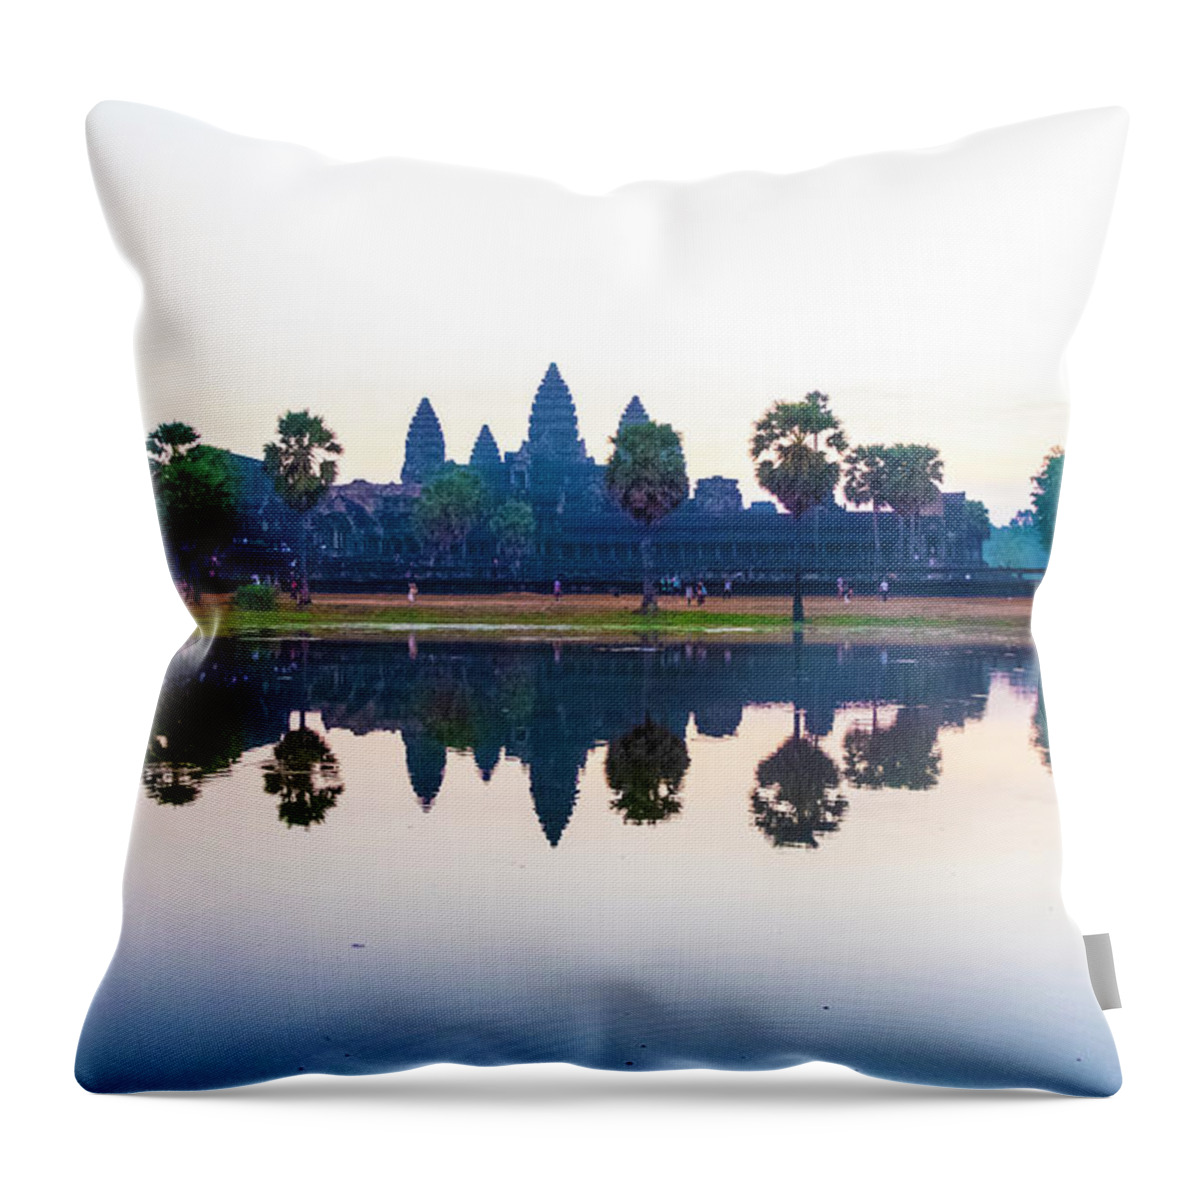 Angkor Wat Throw Pillow featuring the photograph Angkor Wat Reflections by Madeline Ellis